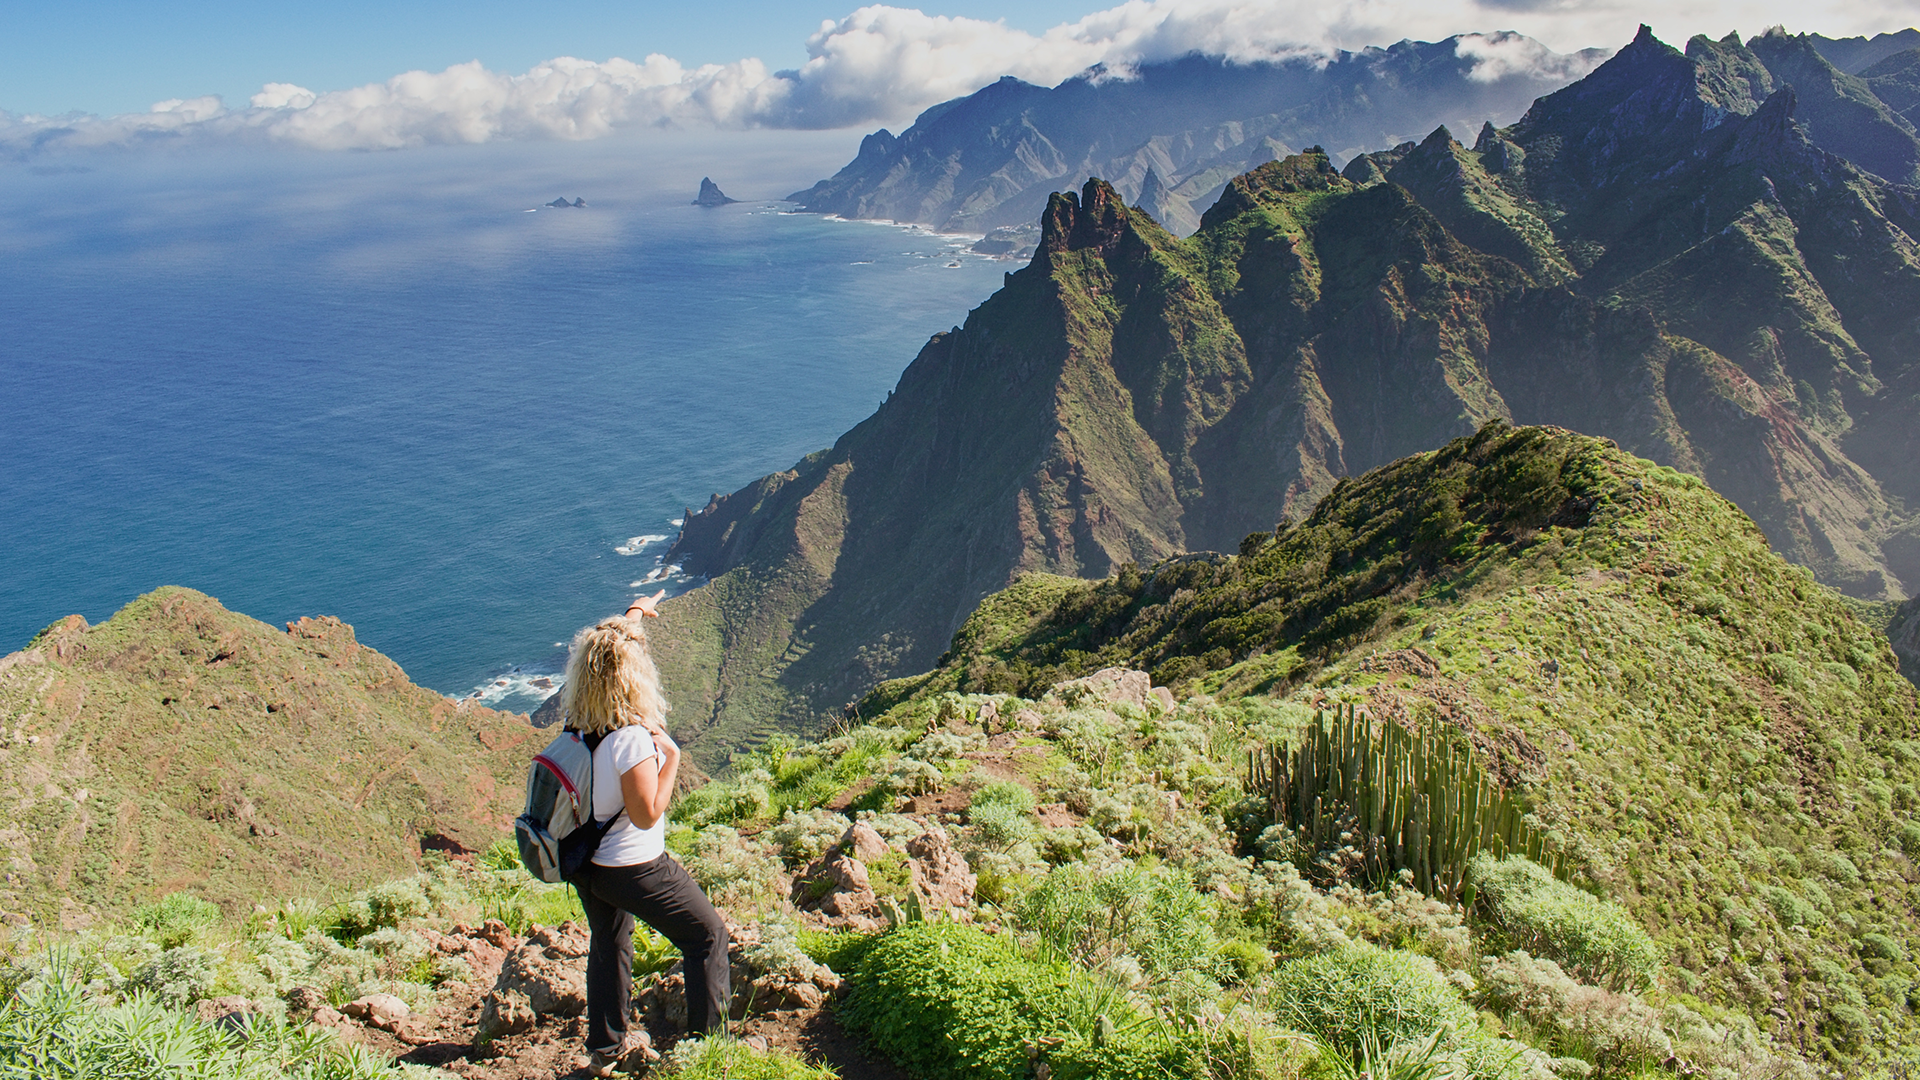 A young woman hiking on tall cliffs overlooking the sea